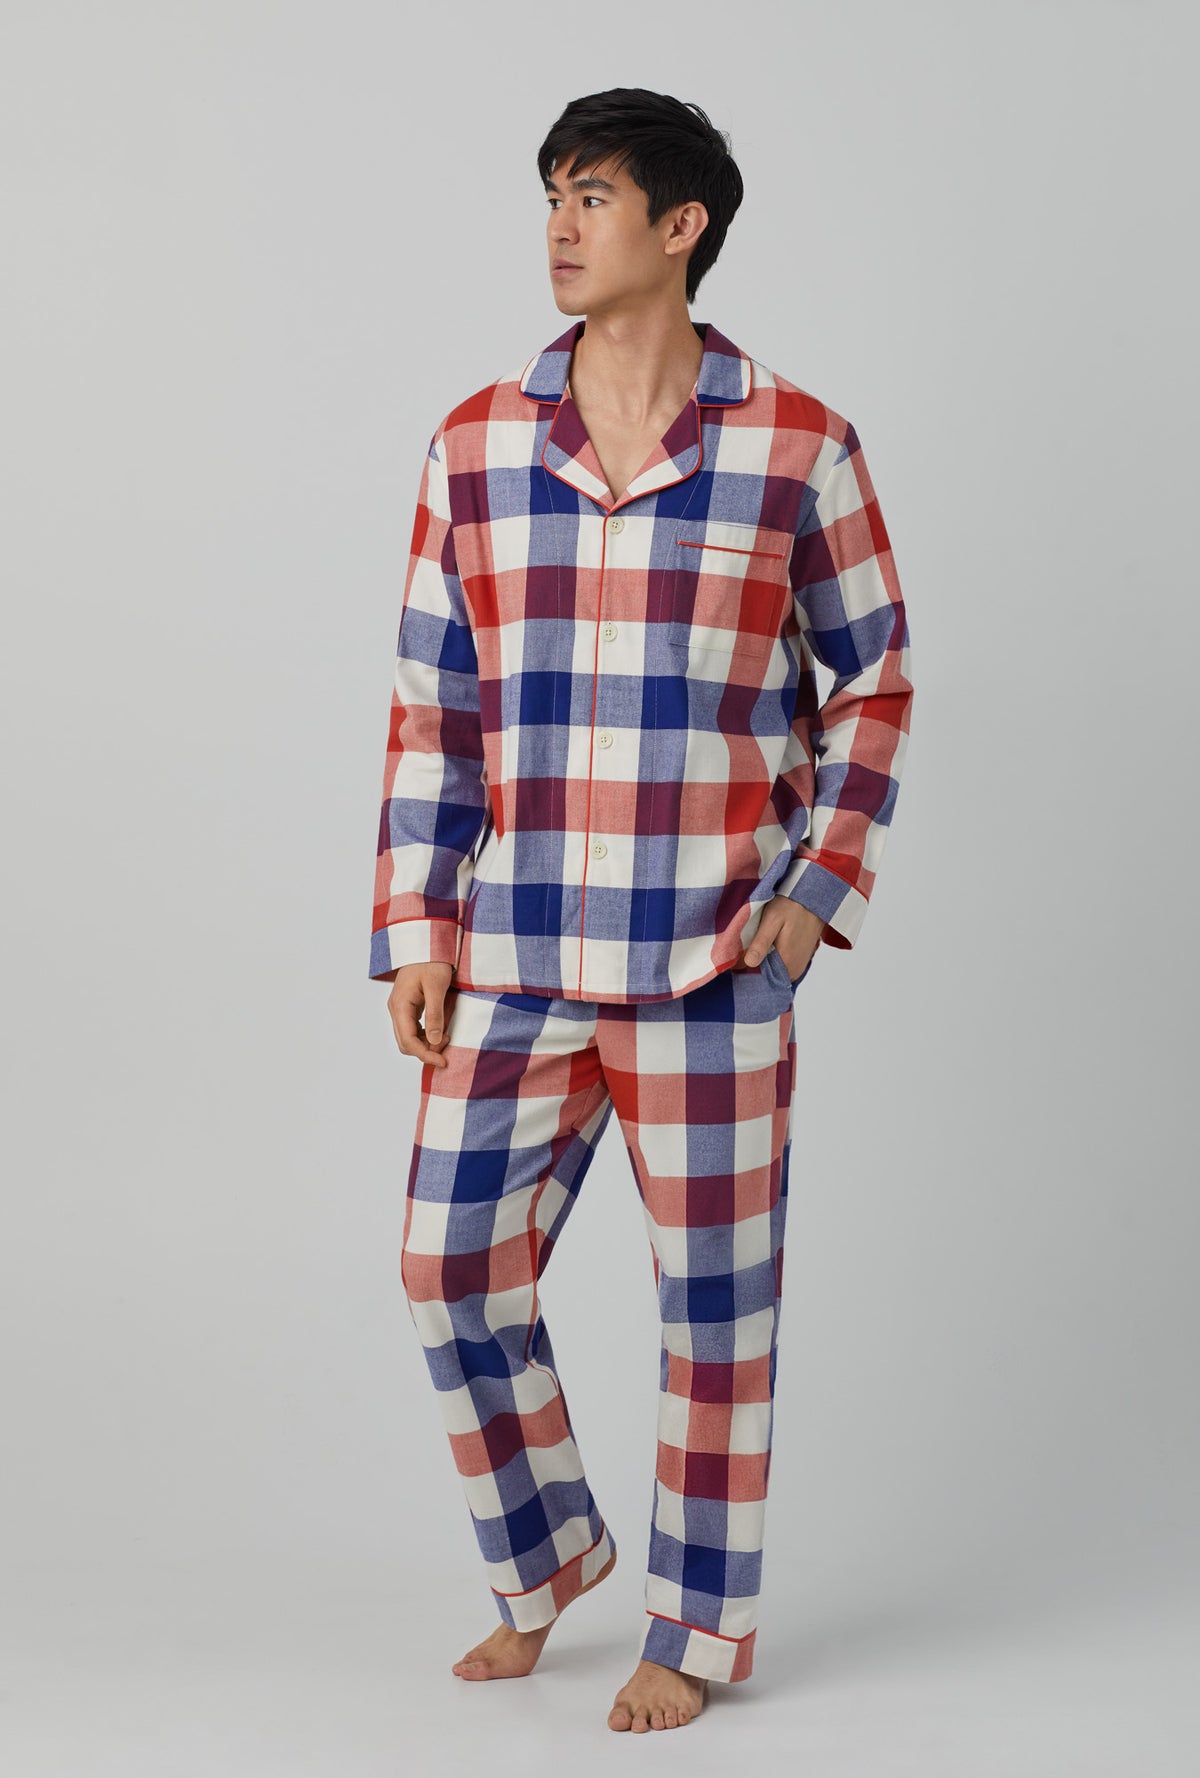 Harvest Plaid Men's Long Sleeve Classic Woven Portuguese Flannel Twill -  Bedhead Pajamas